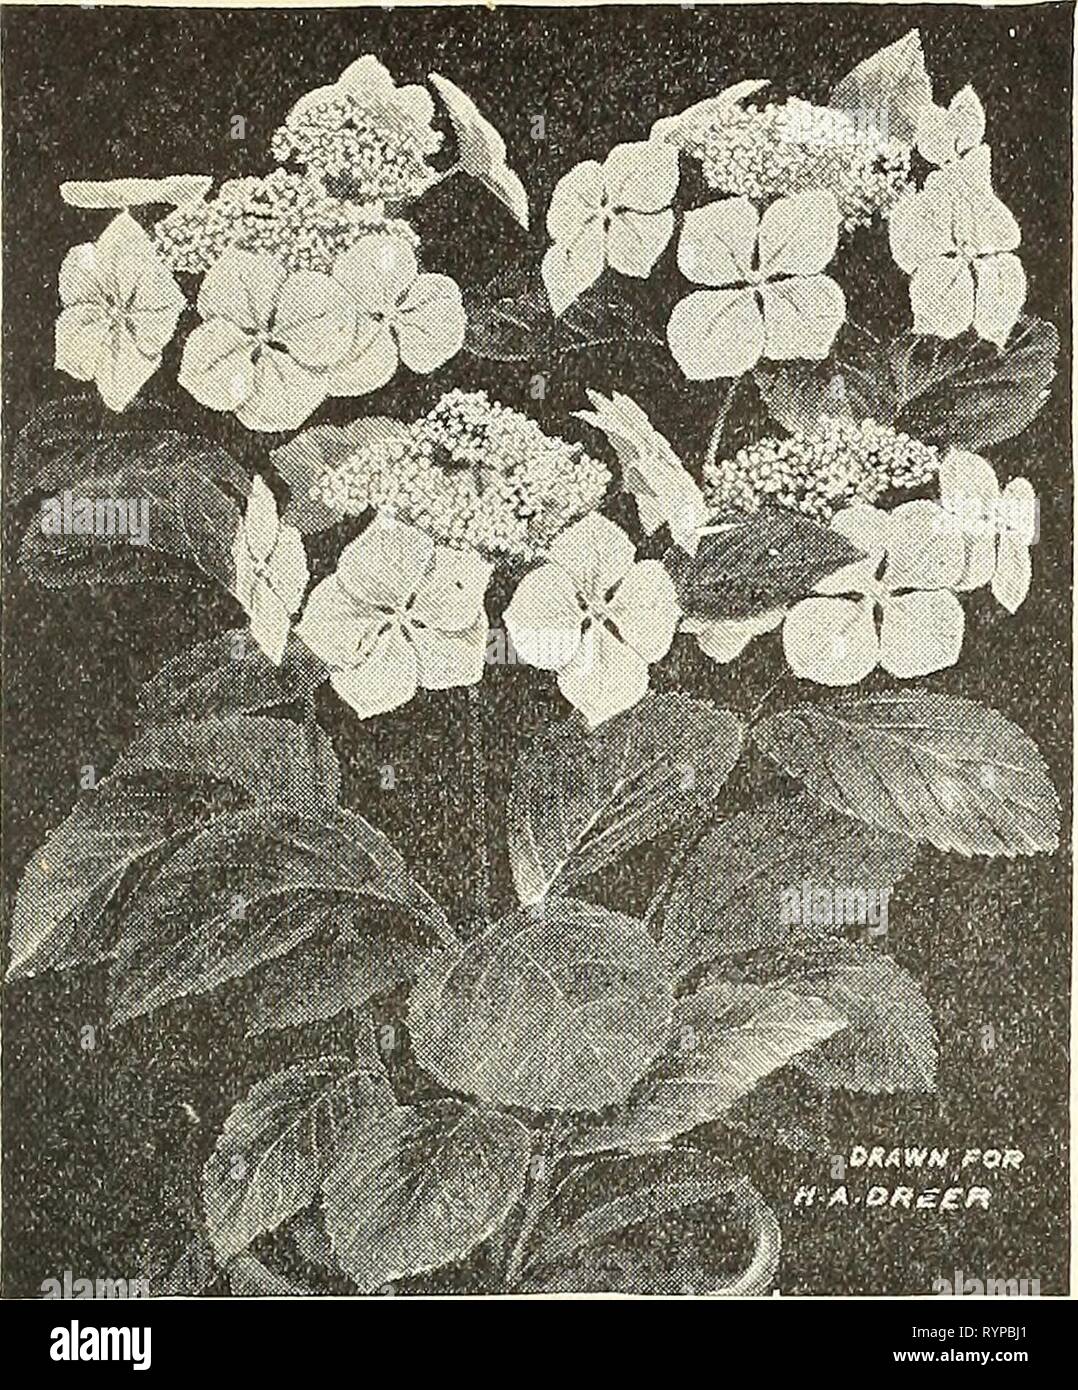 Dreer's wholesale price list summer Dreer's wholesale price list summer edition 1902 July to August : seasonable flower and vegetable seeds, fertilizers, tools, etc., etc . dreerswholesalep1902henr 2 Year: 1902  WHOLESALE PRICE LIST. 7    HYDRANGEA HORTENSIS MARIESII. Genista Fragrans. A nice lot of 4-in. pot plants, $2.00 per doz.; $15.00 per 100. Hydrangea Hortensis Mariesii. One of the most distinct and effective varieties yet introduced. It is especially remarkable for the large size and distinct color of its sterile flowers, which are fully 3 inches across ; of a light pink color tinted w Stock Photo